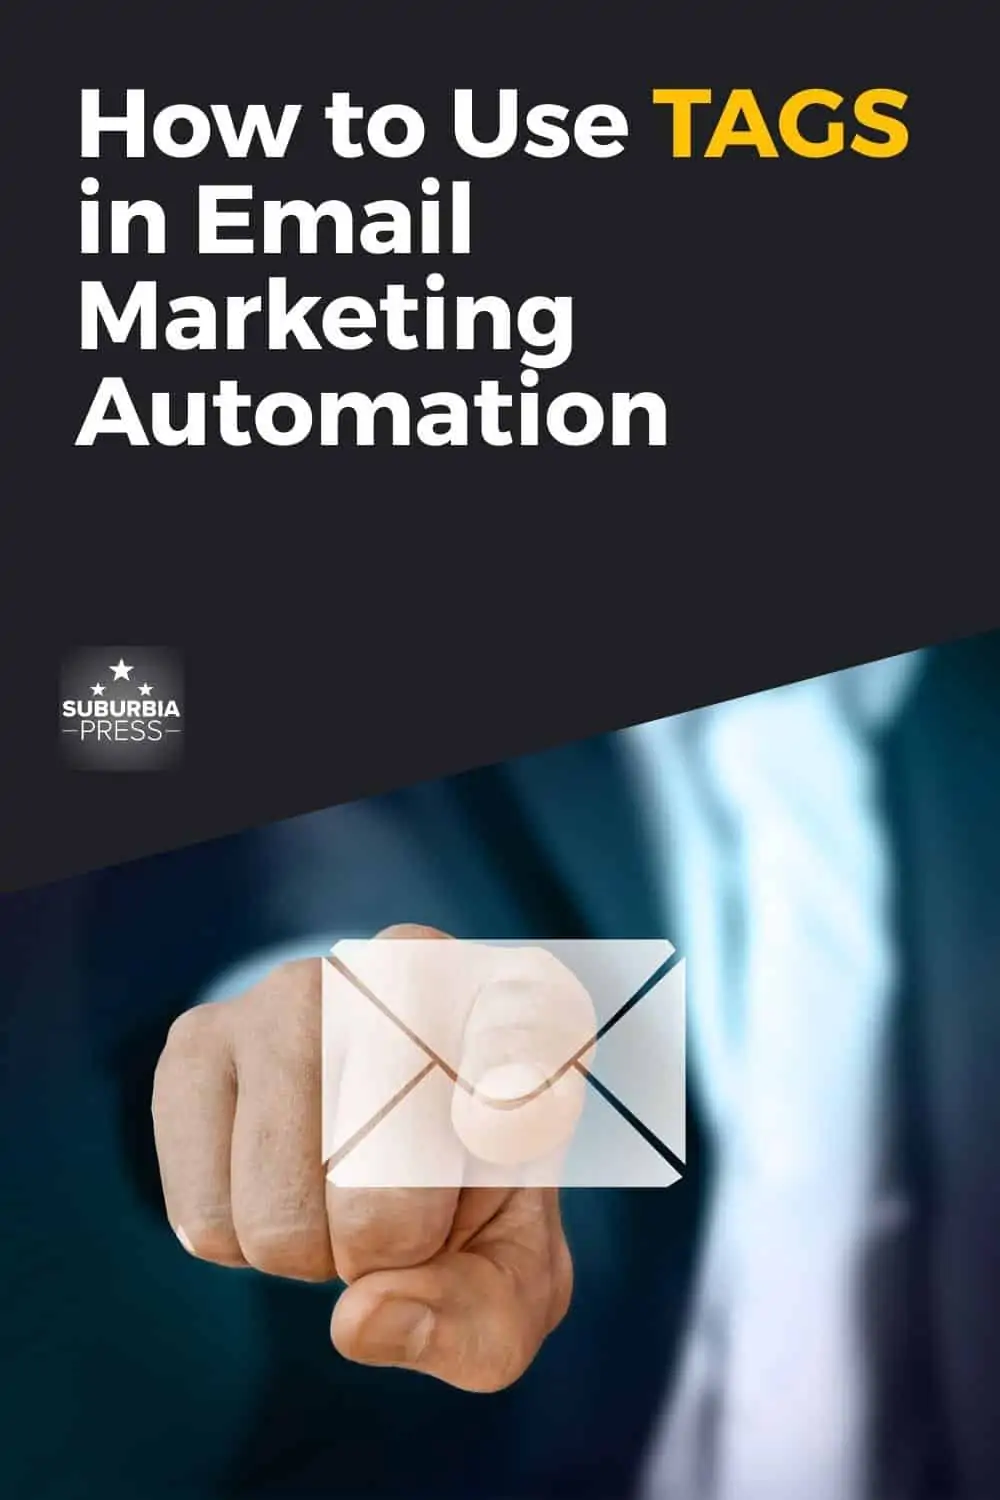 How to Use Tags in Email Marketing Automation